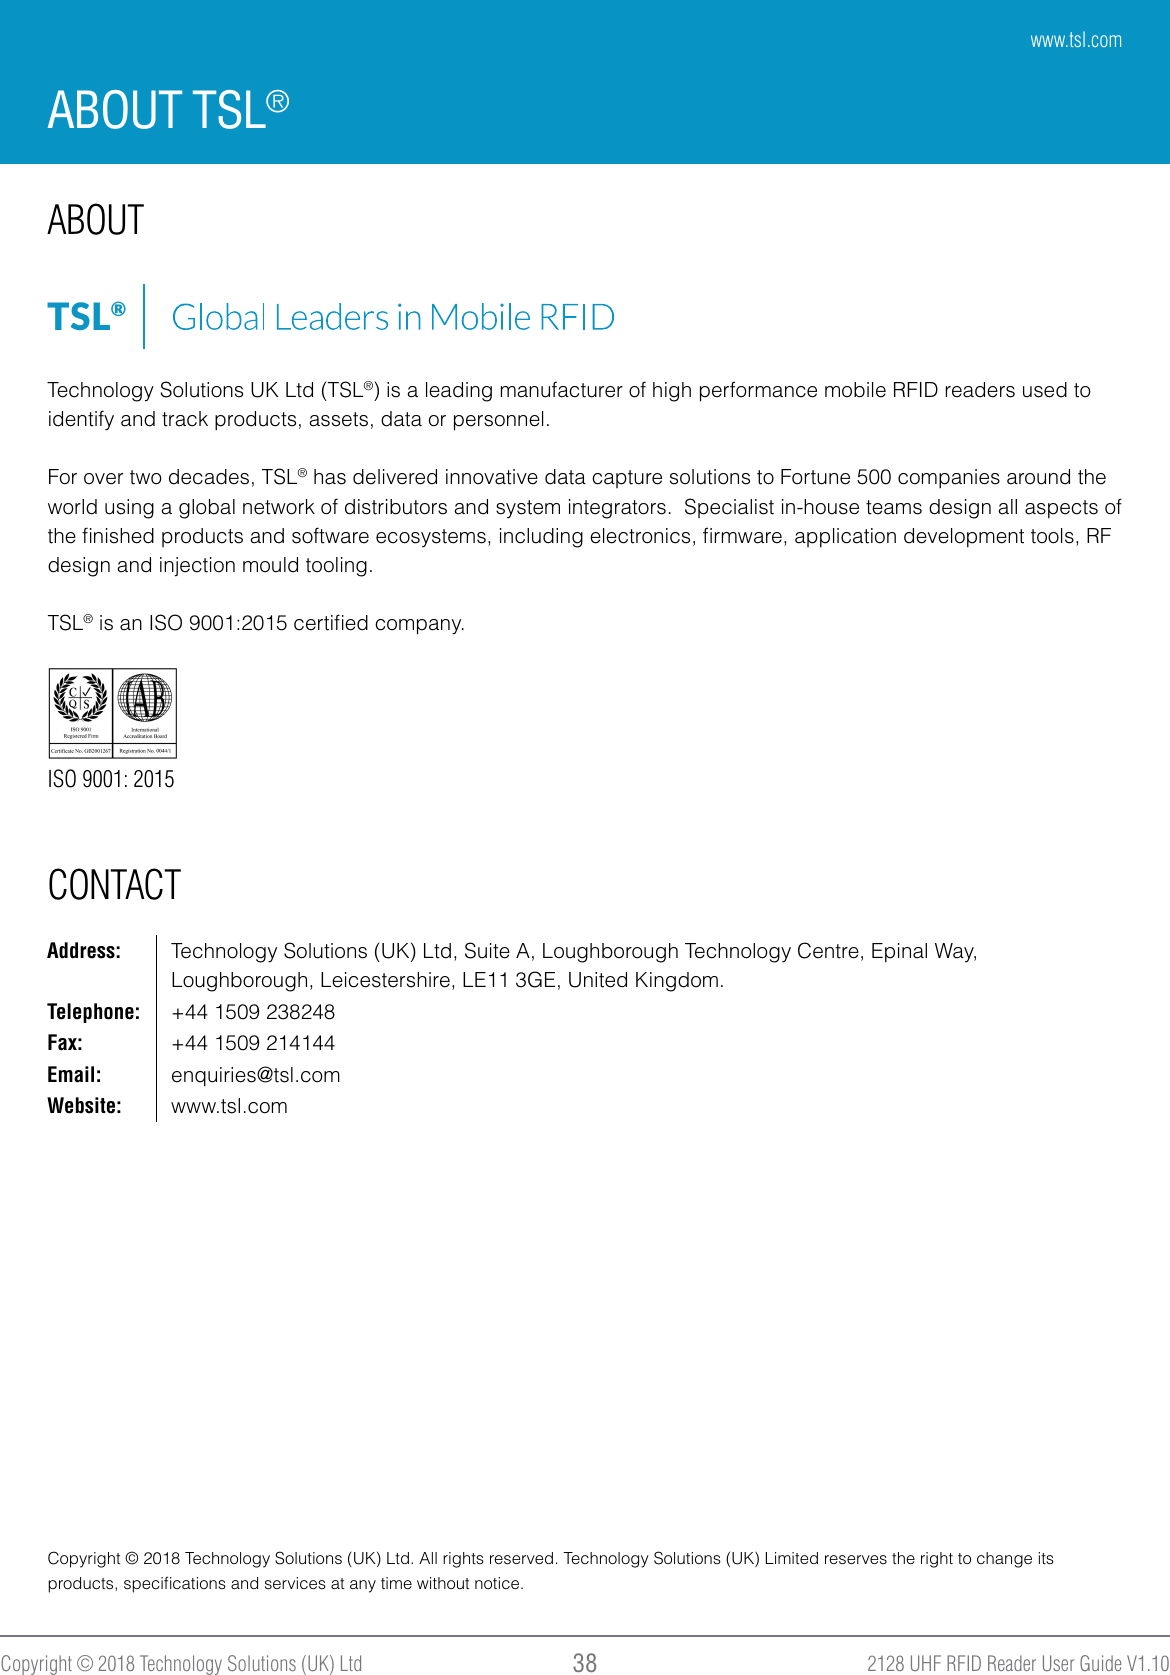 2128 UHF RFID Reader User Guide V1.10Copyright © 2018 Technology Solutions (UK) Ltd 38ABOUT TSL®ABOUT CONTACTISO 9001: 2015Technology Solutions UK Ltd (TSL®) is a leading manufacturer of high performance mobile RFID readers used to identify and track products, assets, data or personnel.For over two decades, TSL® has delivered innovative data capture solutions to Fortune 500 companies around the world using a global network of distributors and system integrators.  Specialist in-house teams design all aspects of the ﬁnished products and software ecosystems, including electronics, ﬁrmware, application development tools, RF design and injection mould tooling.TSL® is an ISO 9001:2015 certiﬁed company.TSL®Address: Technology Solutions (UK) Ltd, Suite A, Loughborough Technology Centre, Epinal Way, Loughborough, Leicestershire, LE11 3GE, United Kingdom.Telephone: +44 1509 238248Fax: +44 1509 214144Email: enquiries@tsl.comWebsite: www.tsl.comCopyright © 2018 Technology Solutions (UK) Ltd. All rights reserved. Technology Solutions (UK) Limited reserves the right to change its products, speciﬁcations and services at any time without notice.www.tsl.com